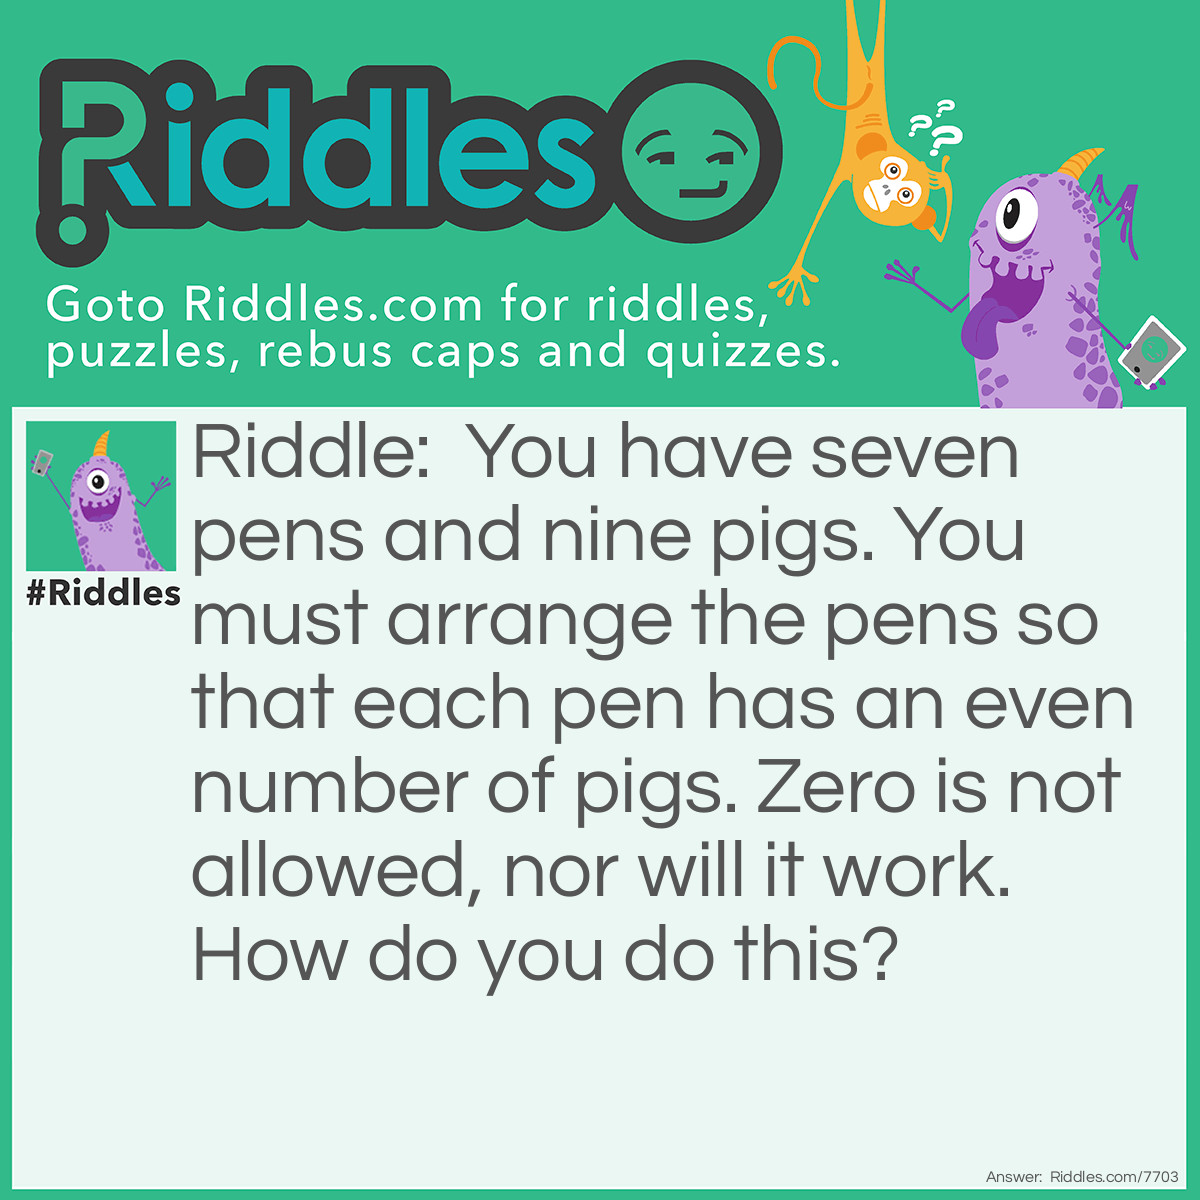 Riddle: You have seven pens and nine pigs. You must arrange the pens so that each pen has an even number of pigs. Zero is not allowed, nor will it work. How do you do this? Answer: Stack the pens.